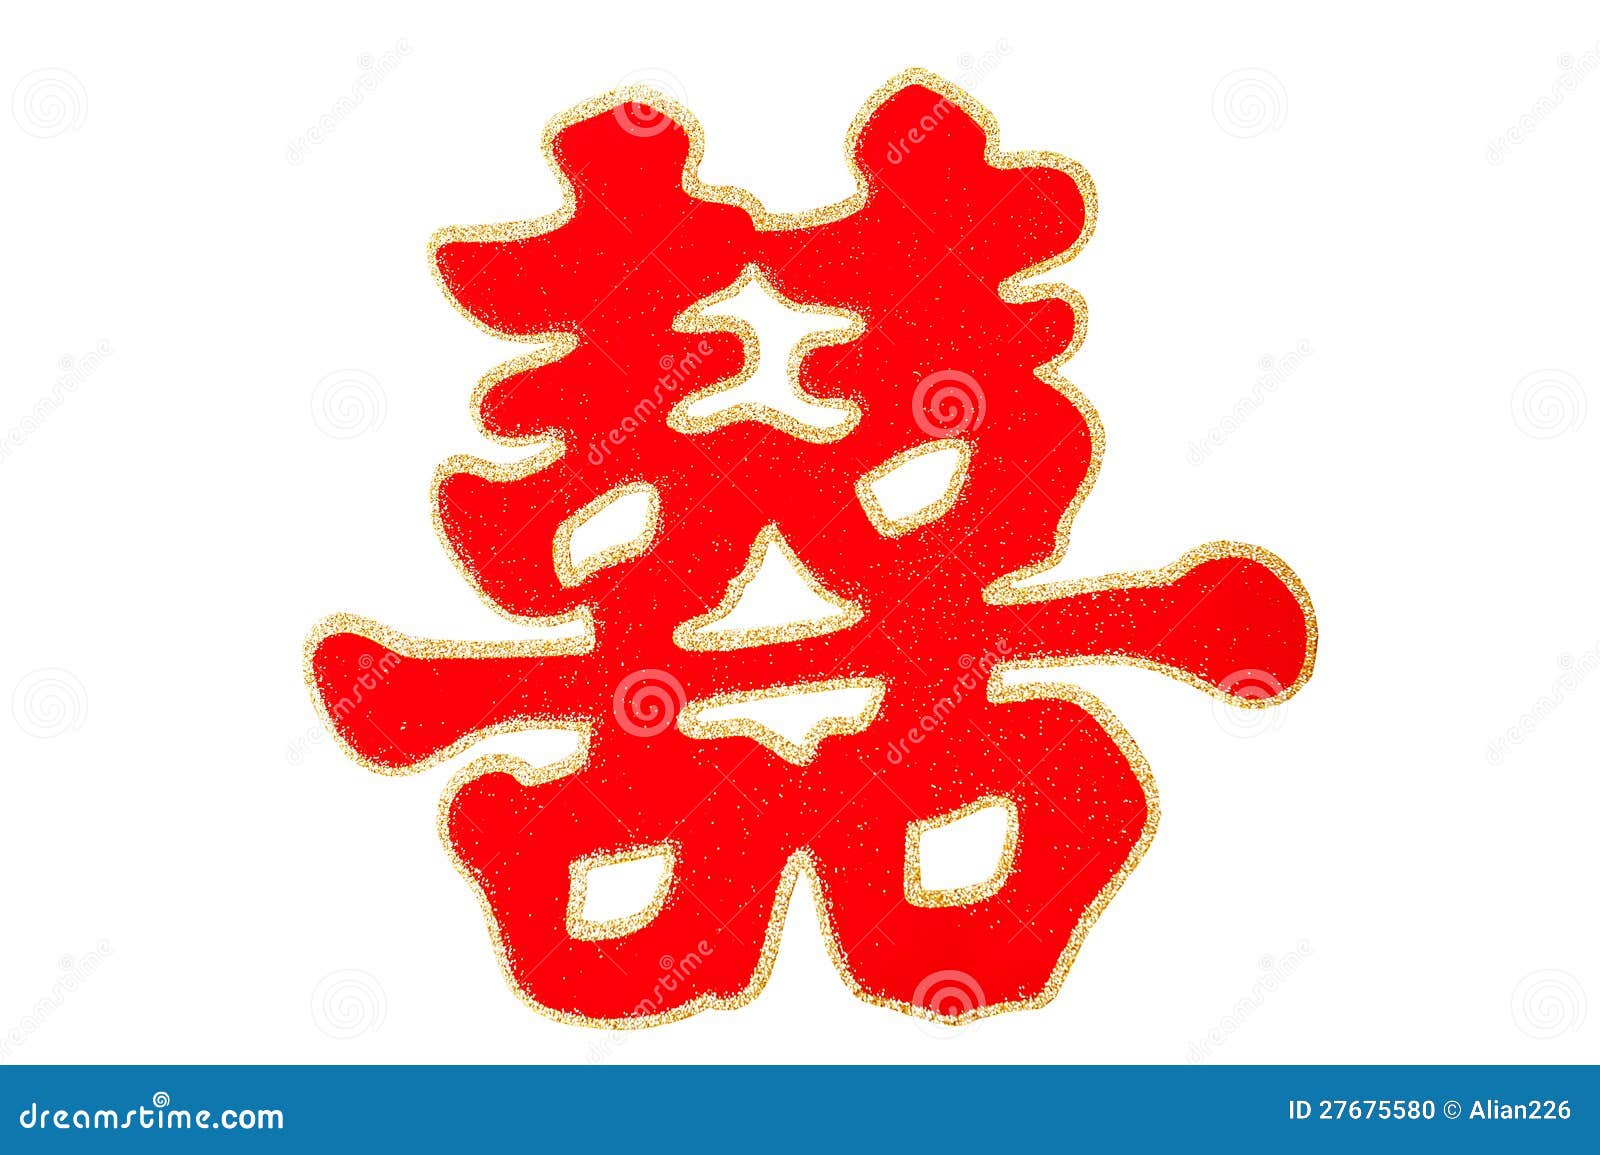 double happiness clipart - photo #36